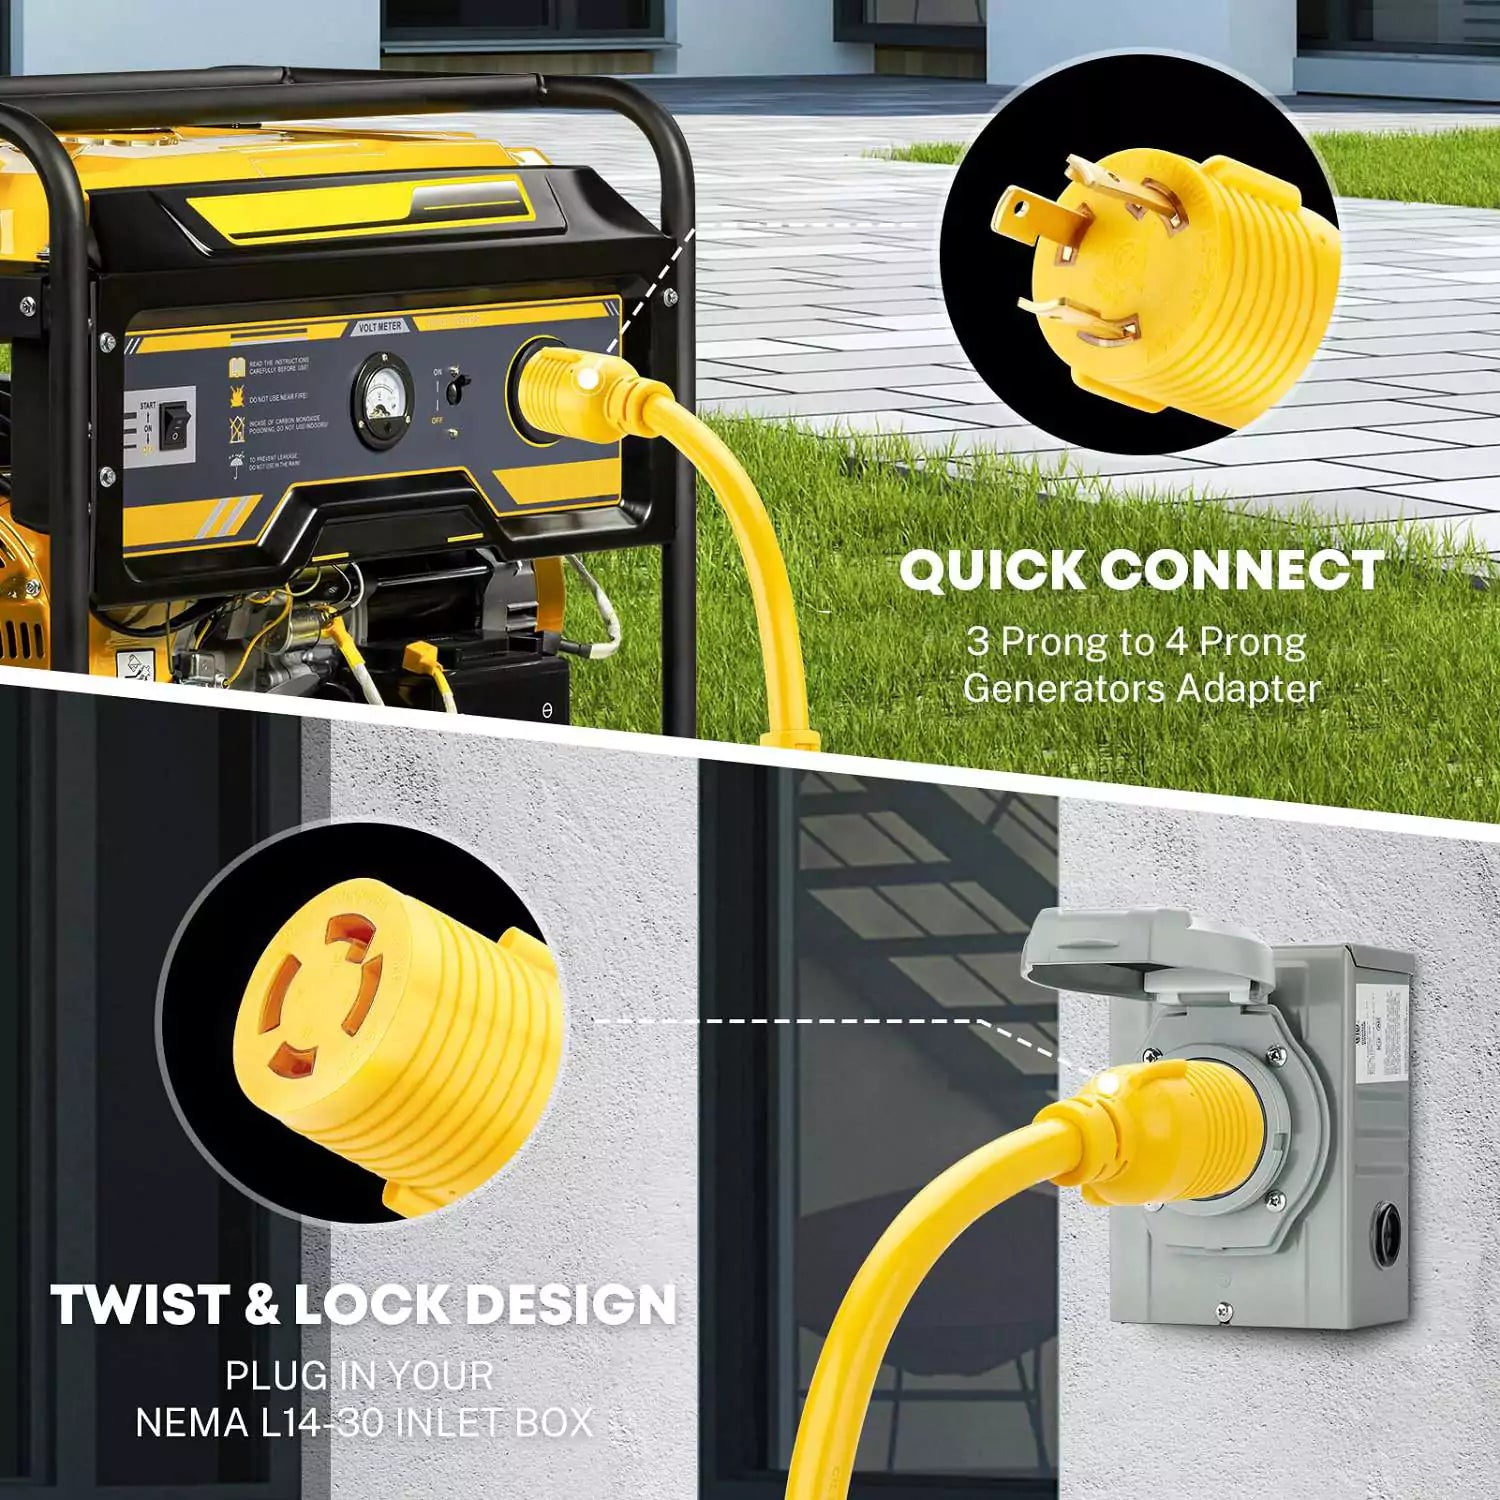 Generator electrical adapters quick connect and twist lock design